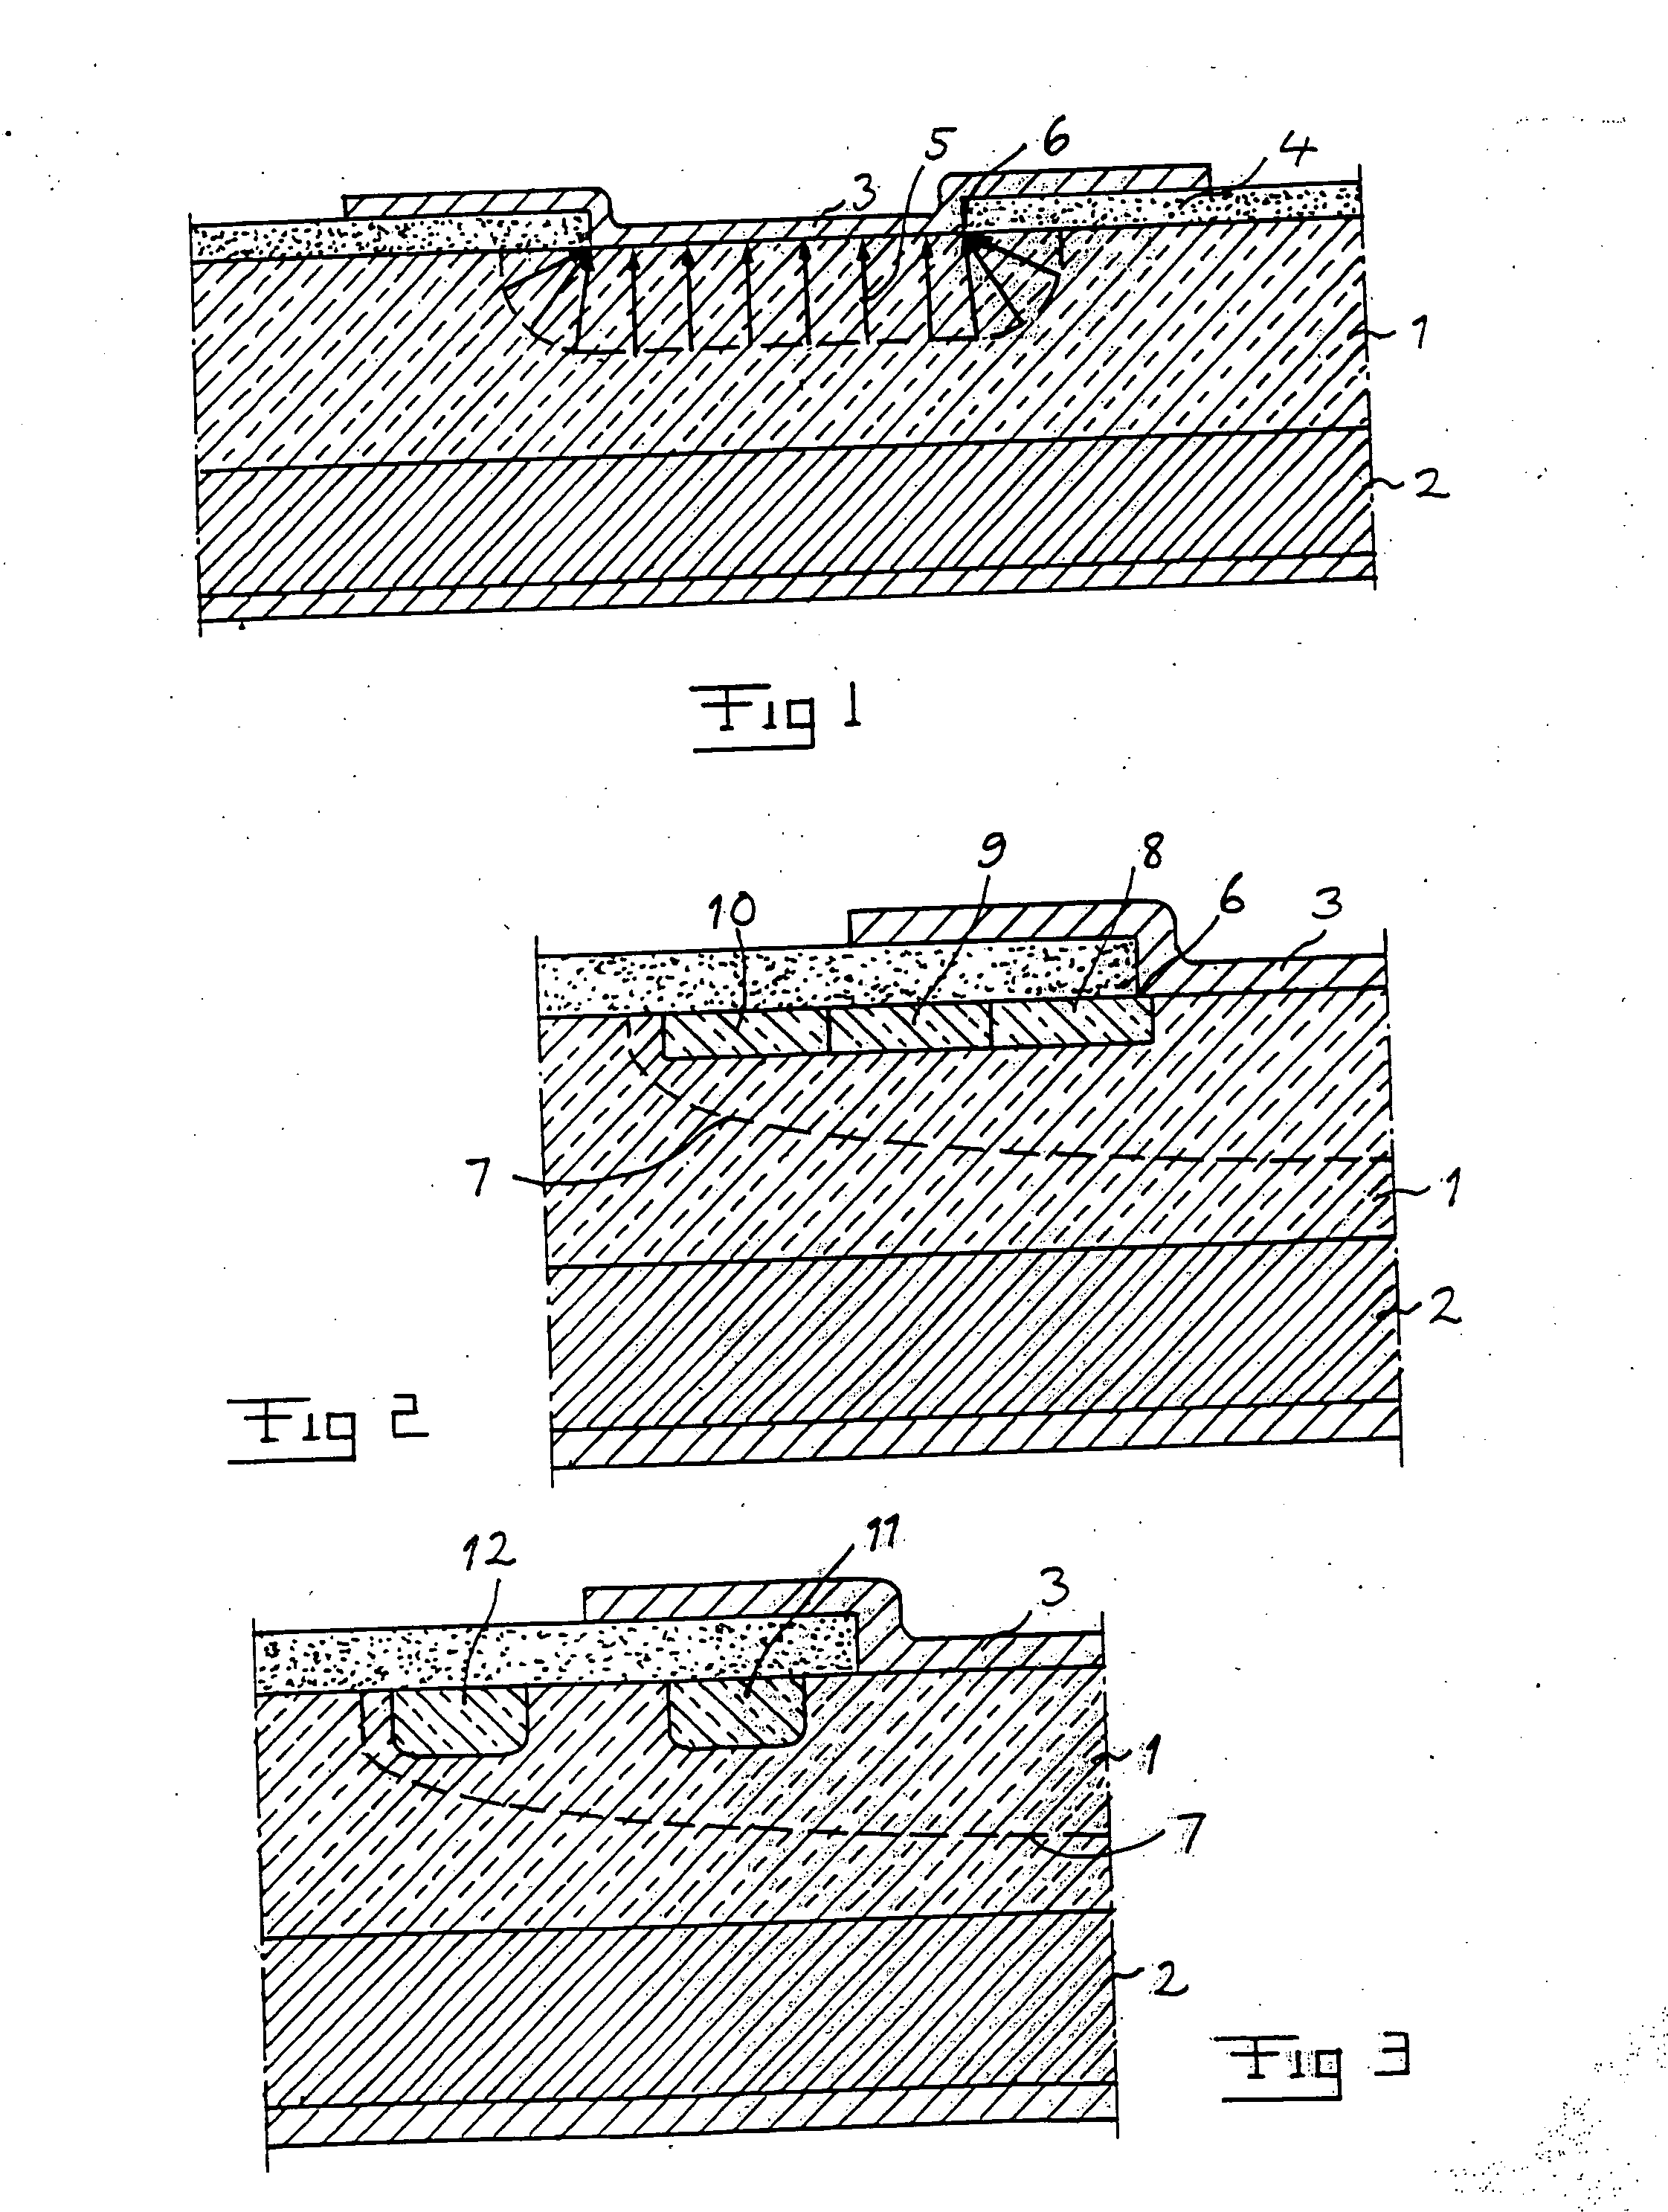 Semiconductor device and a method for production thereof